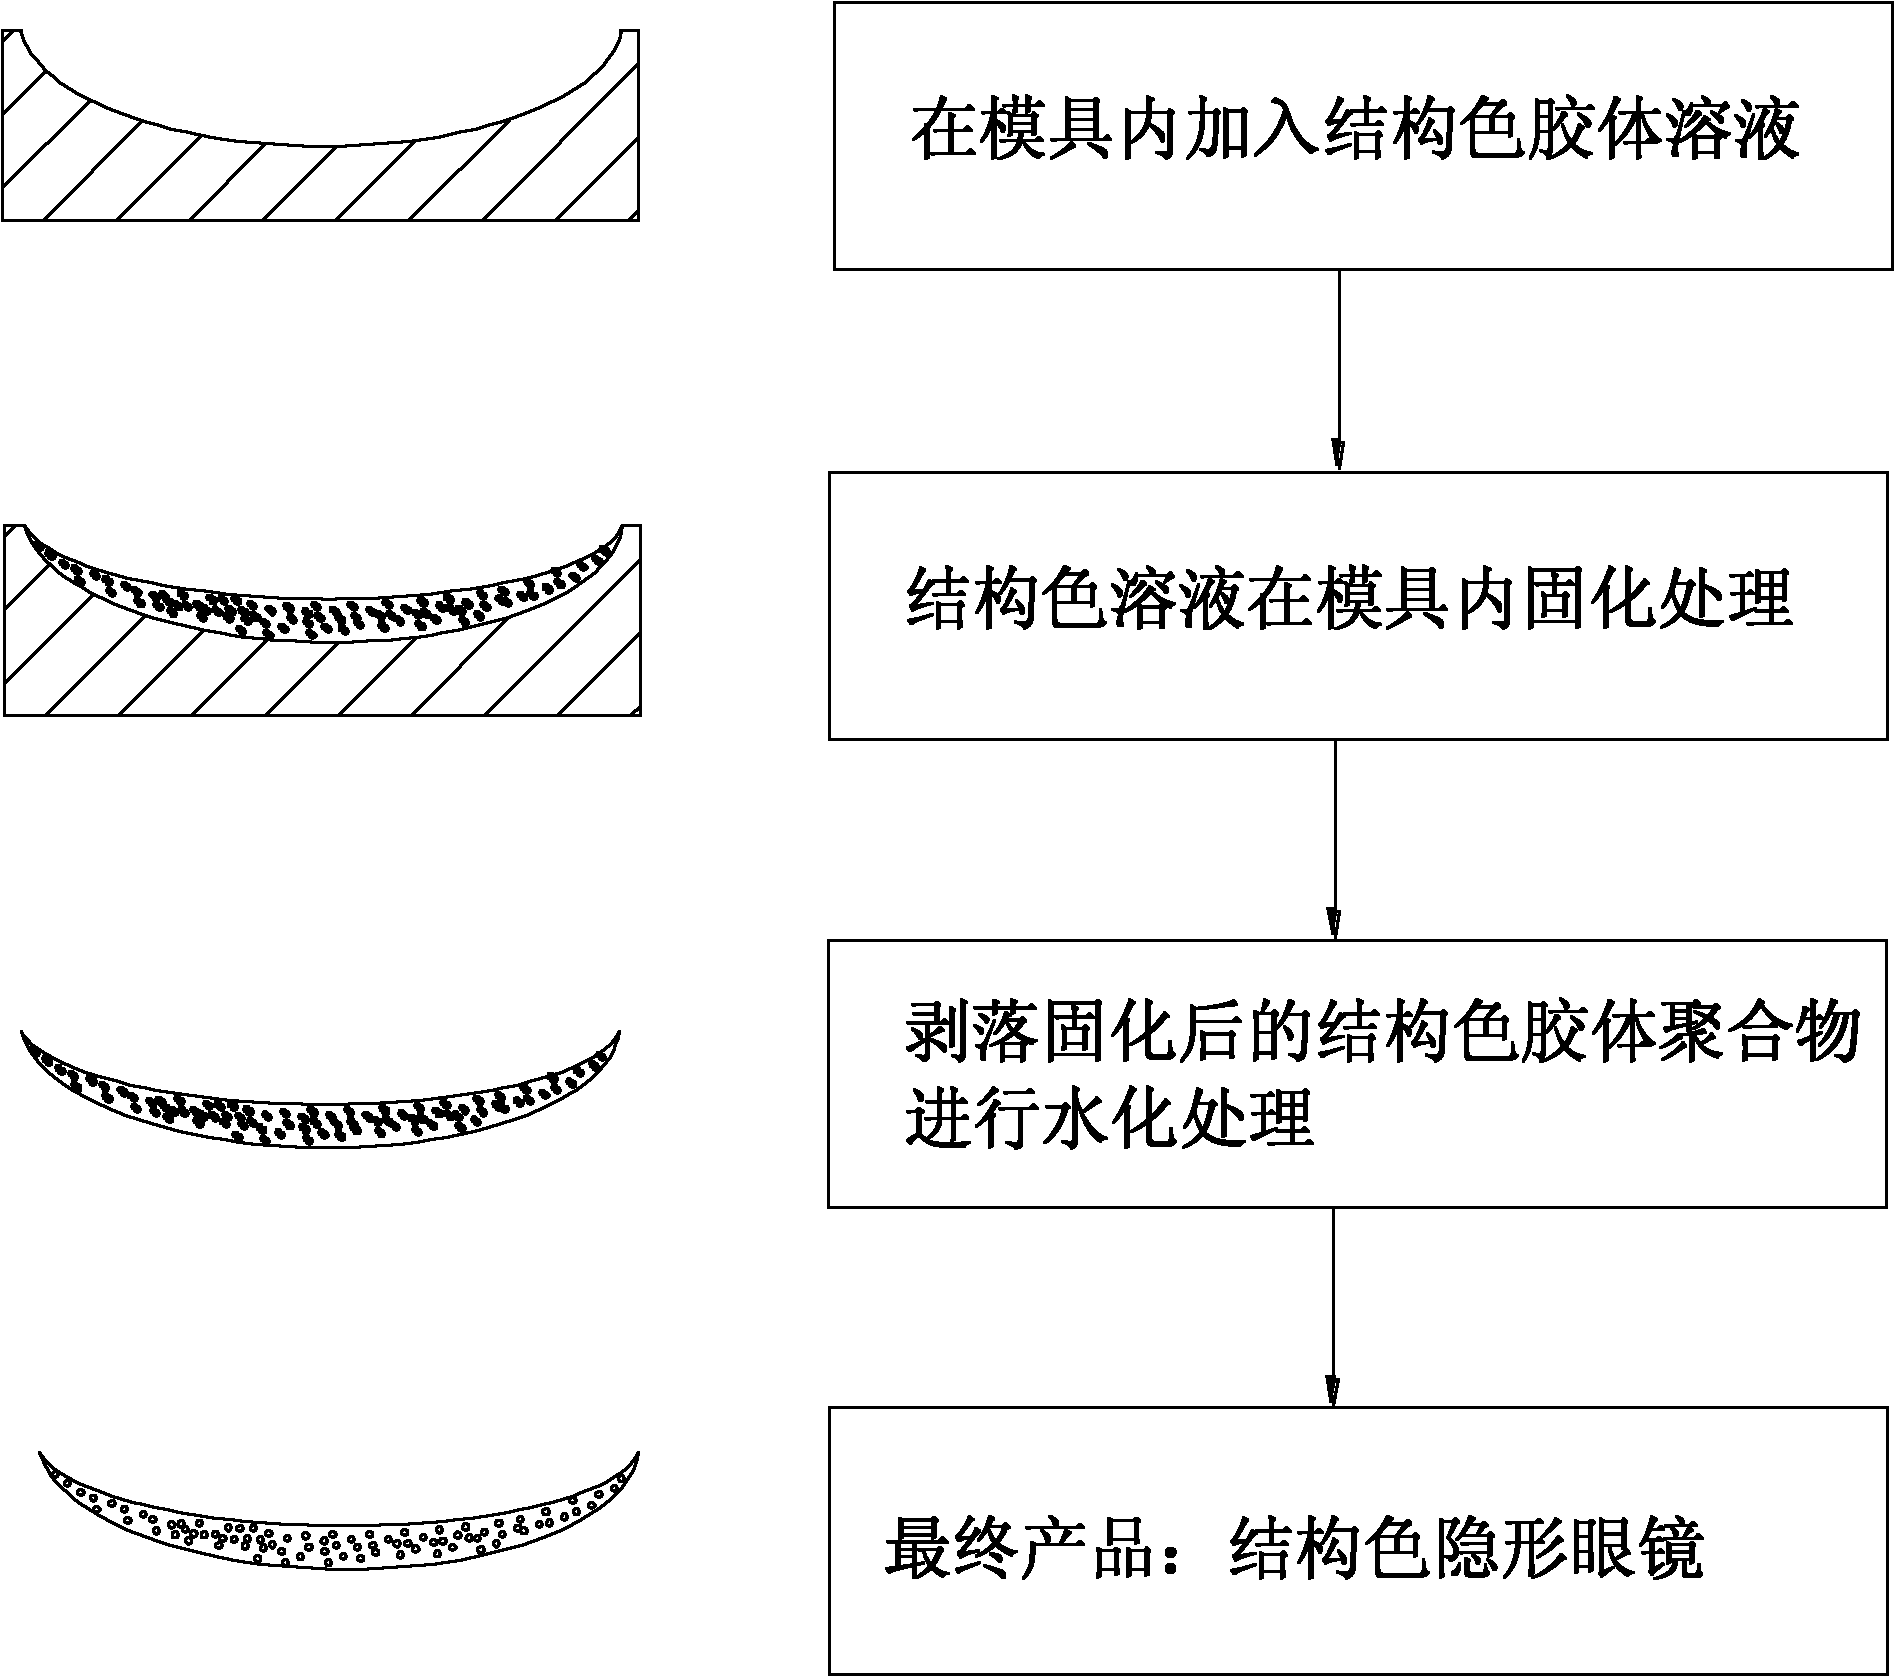 Method for preparing structural-color contact lens